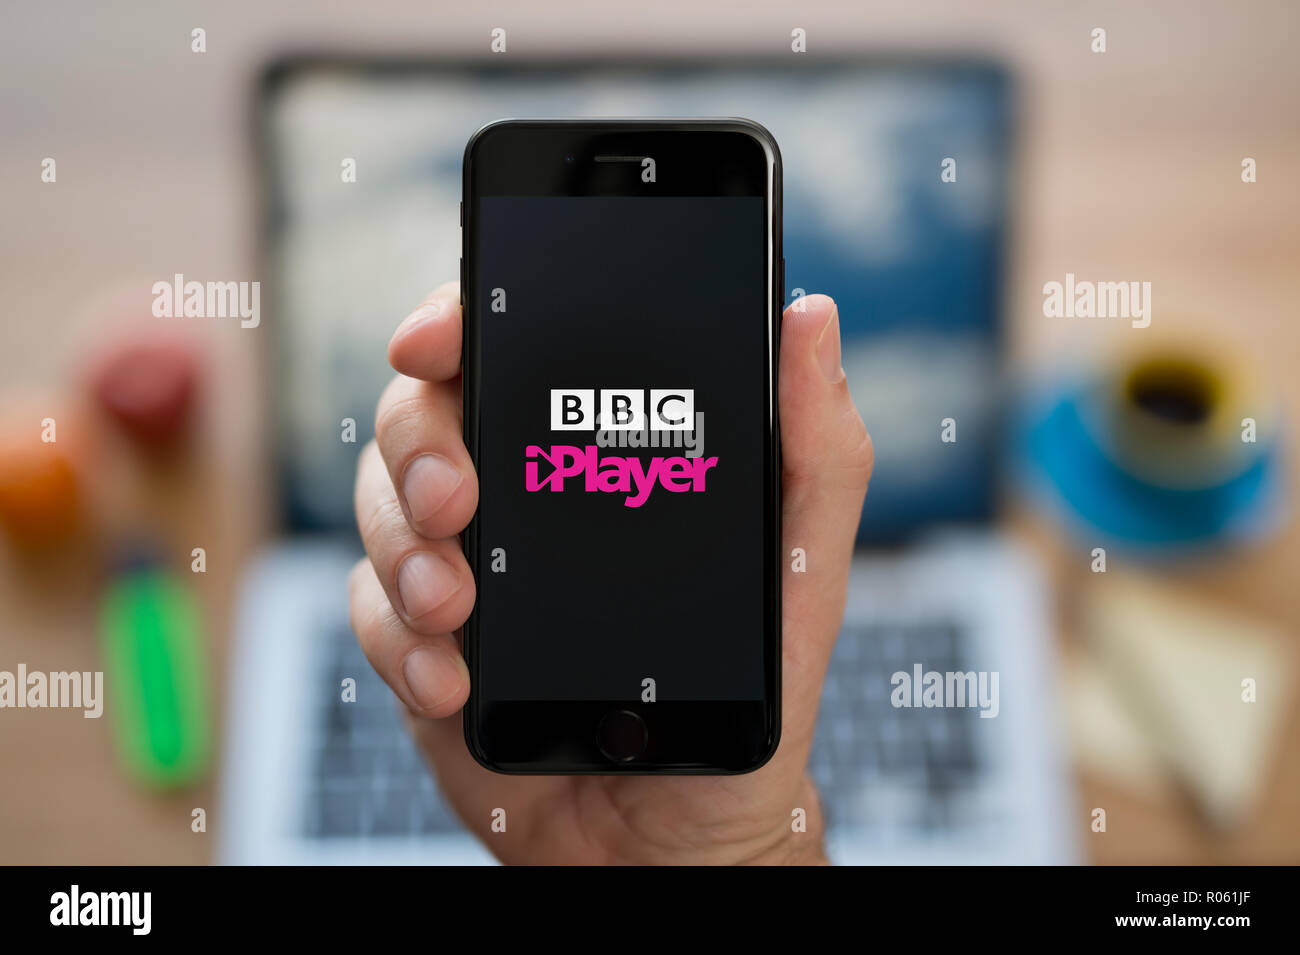 A man looks at his iPhone which displays the BBC iPlayer logo, while sat at his computer desk (Editorial use only). Stock Photo